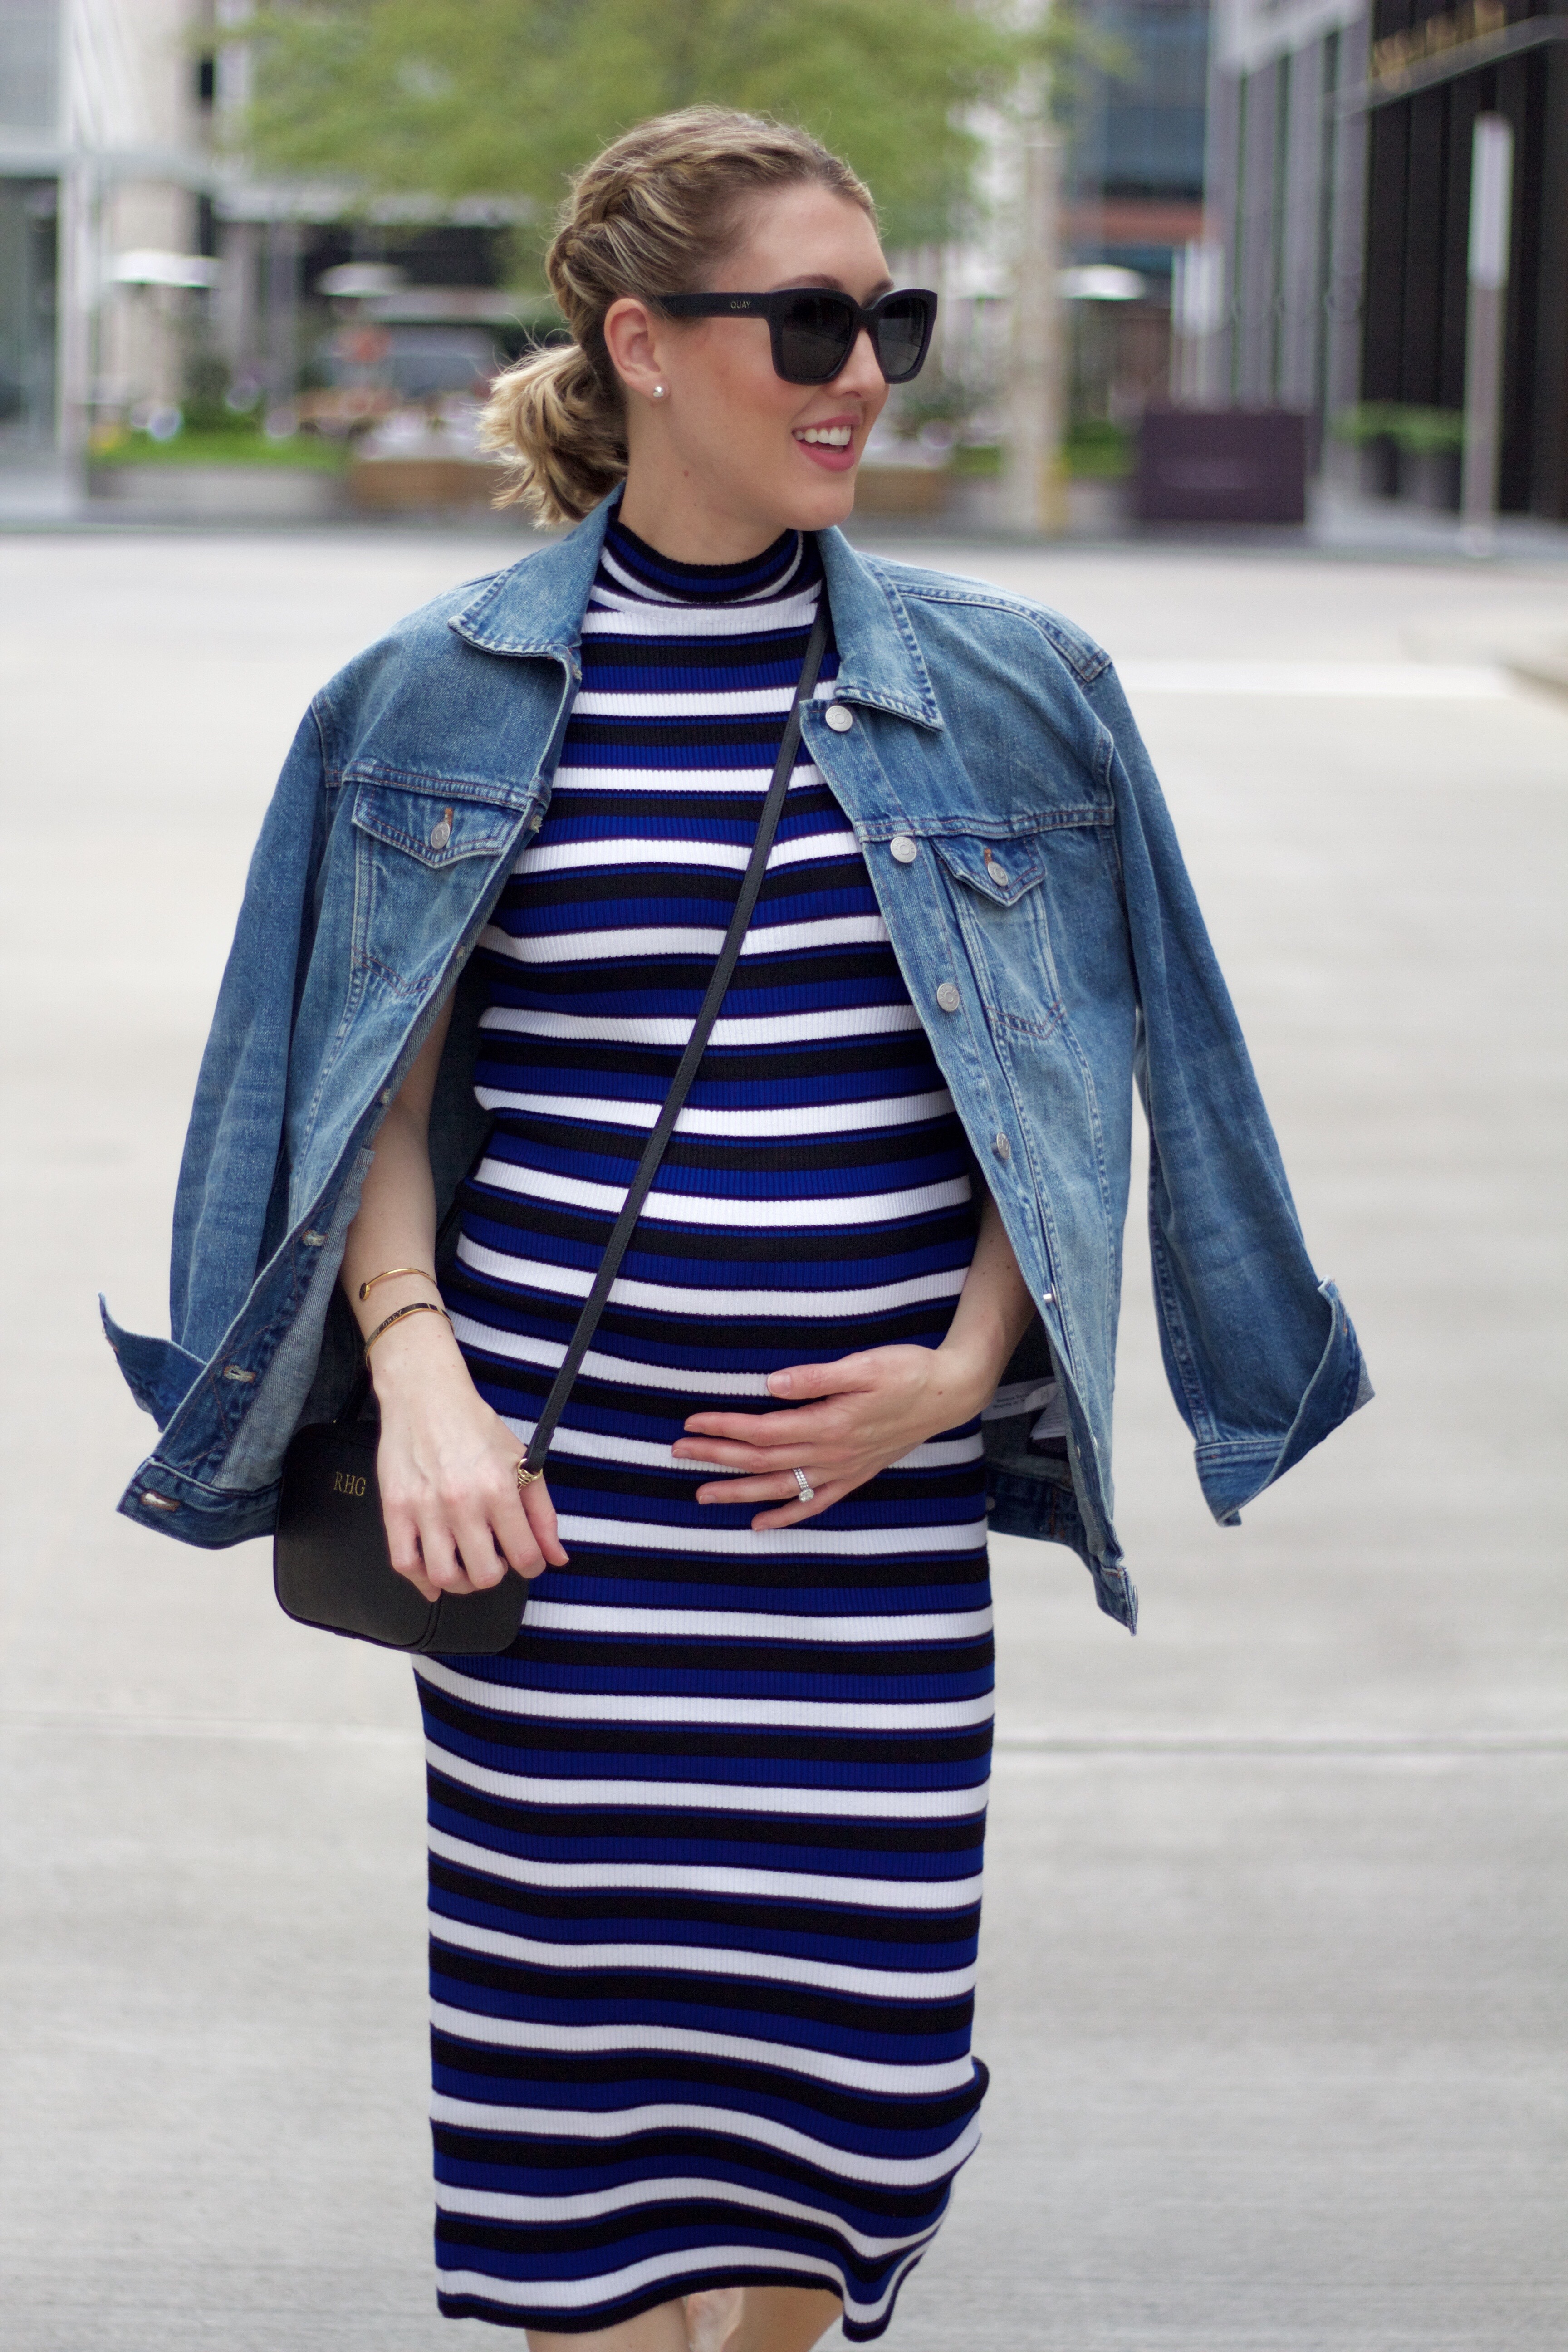 maternity style second trimester